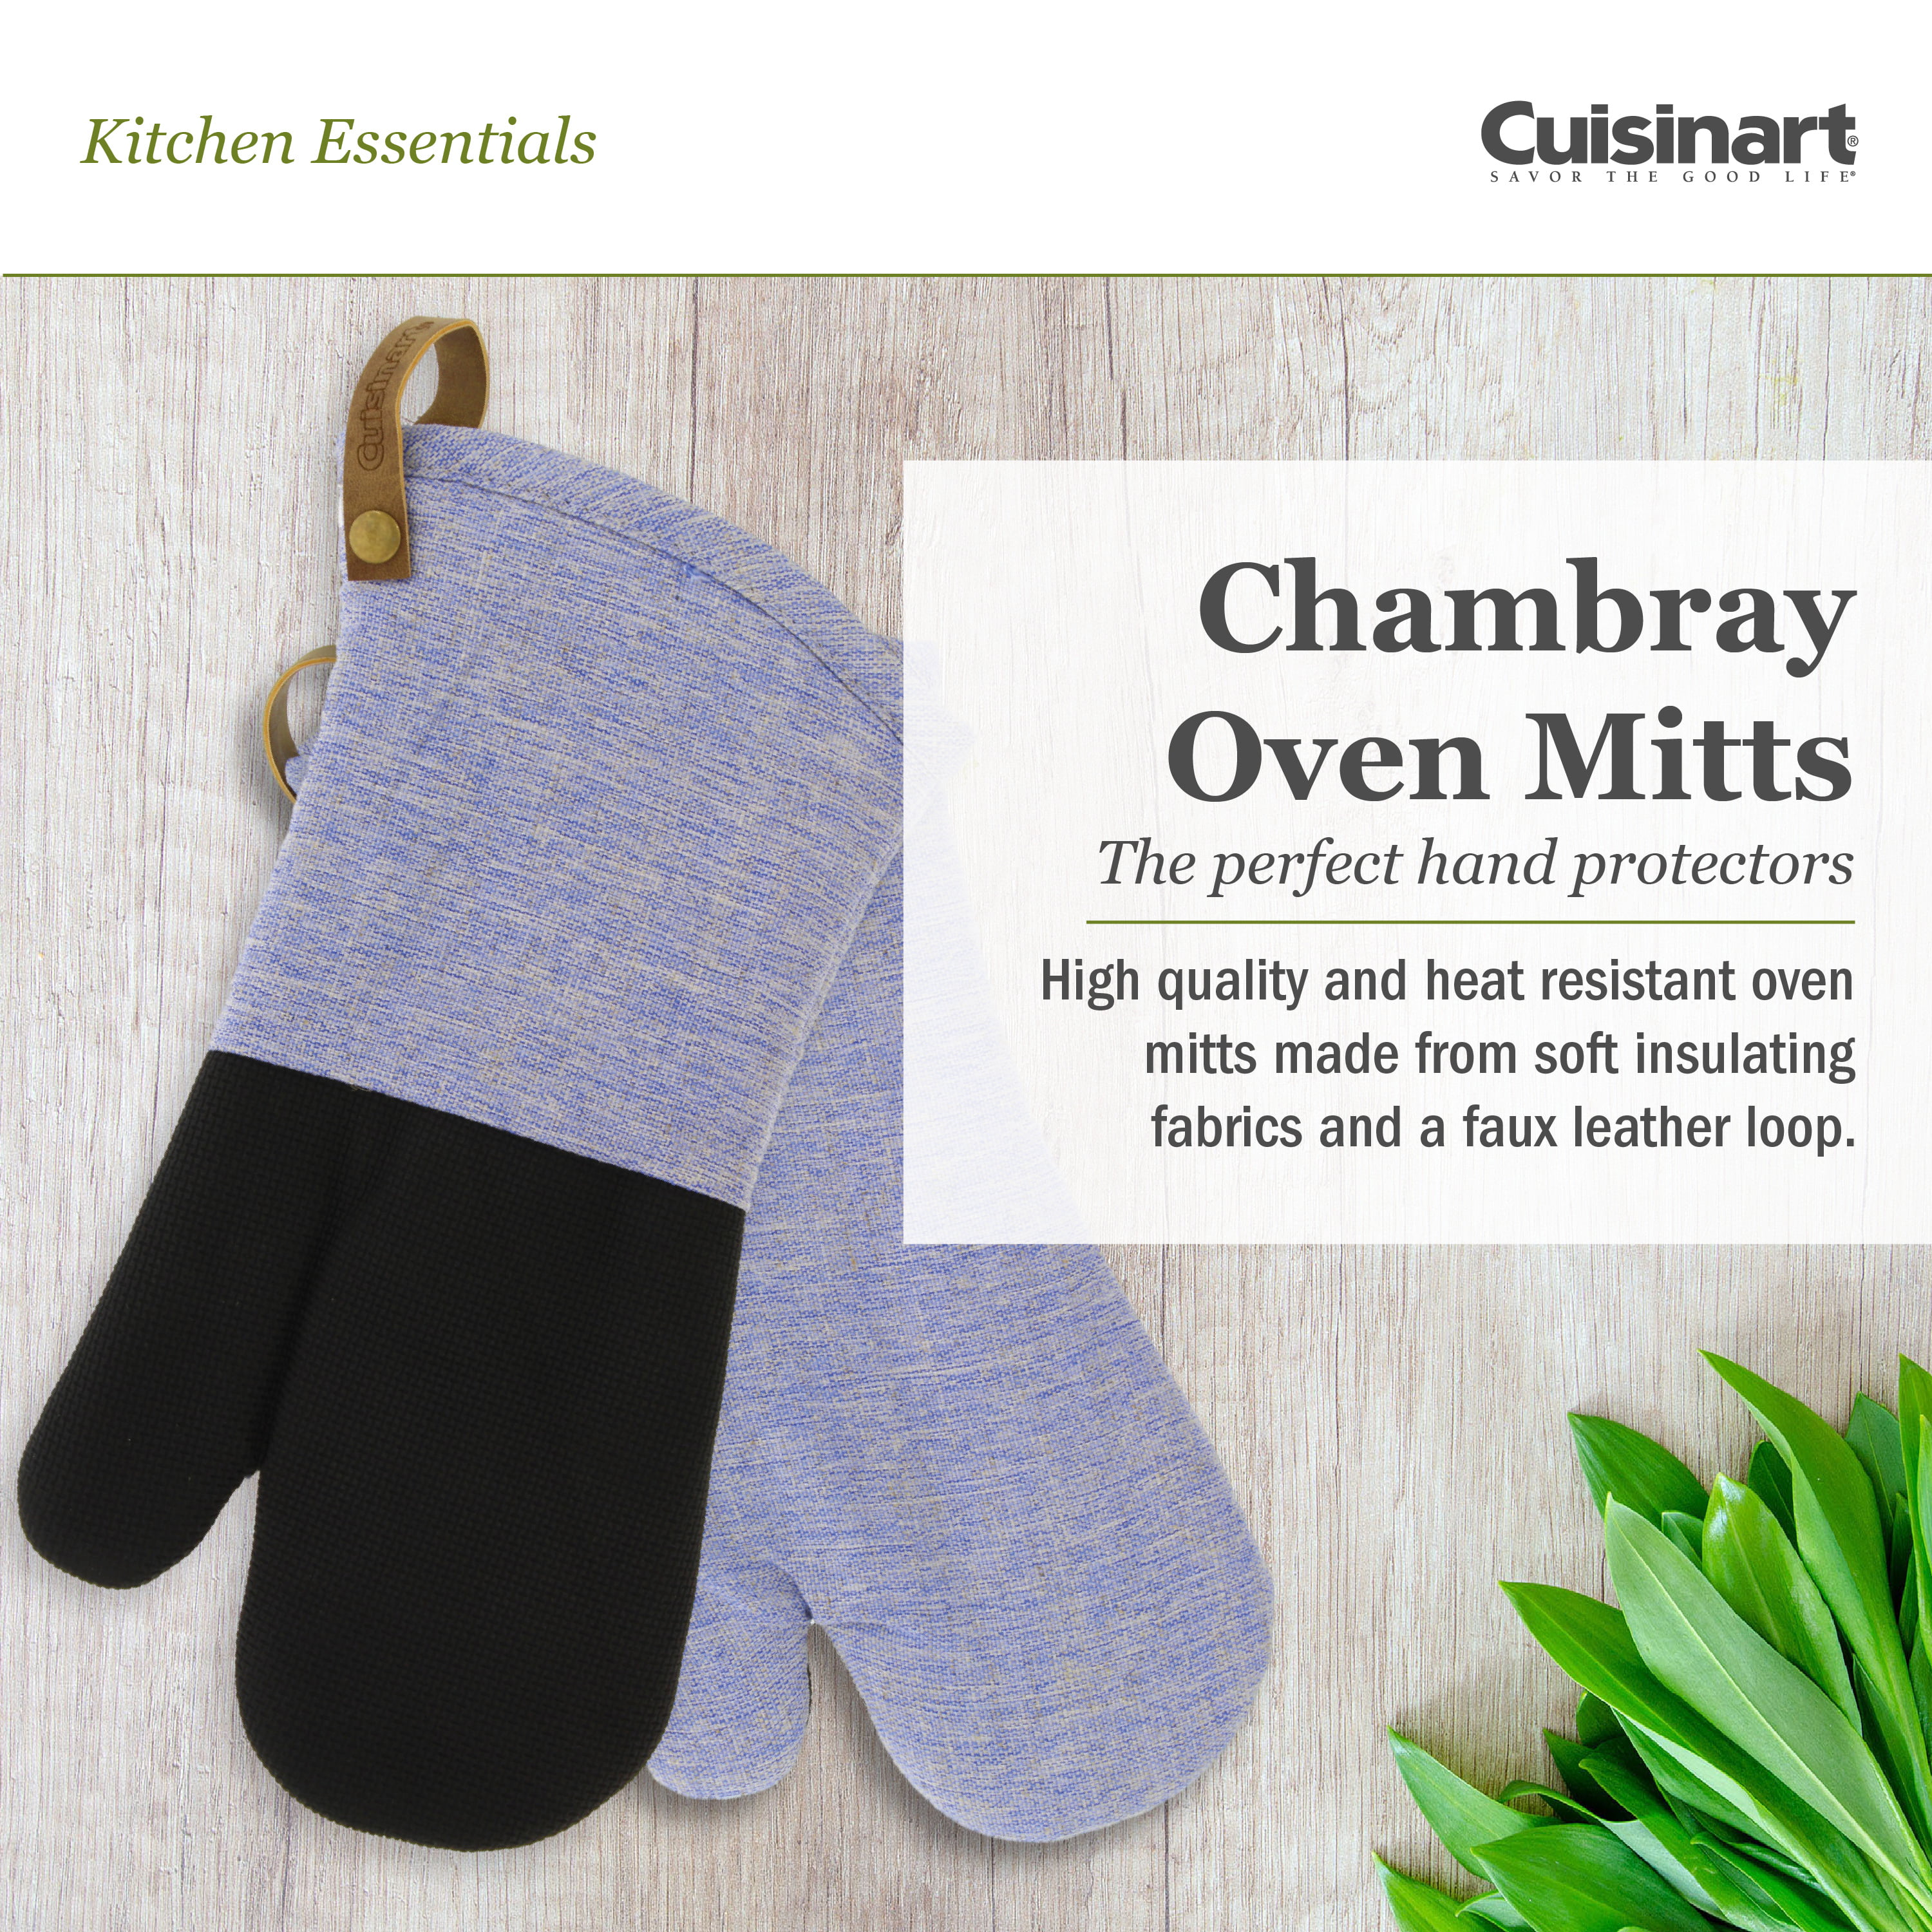 Cuisinart Chambray Pot Holders with Soft Insulated Pockets, 2pk - Heat  Resistant Hot Pads, Trivets Protect Hands and Surfaces from Hot Kitchenware  